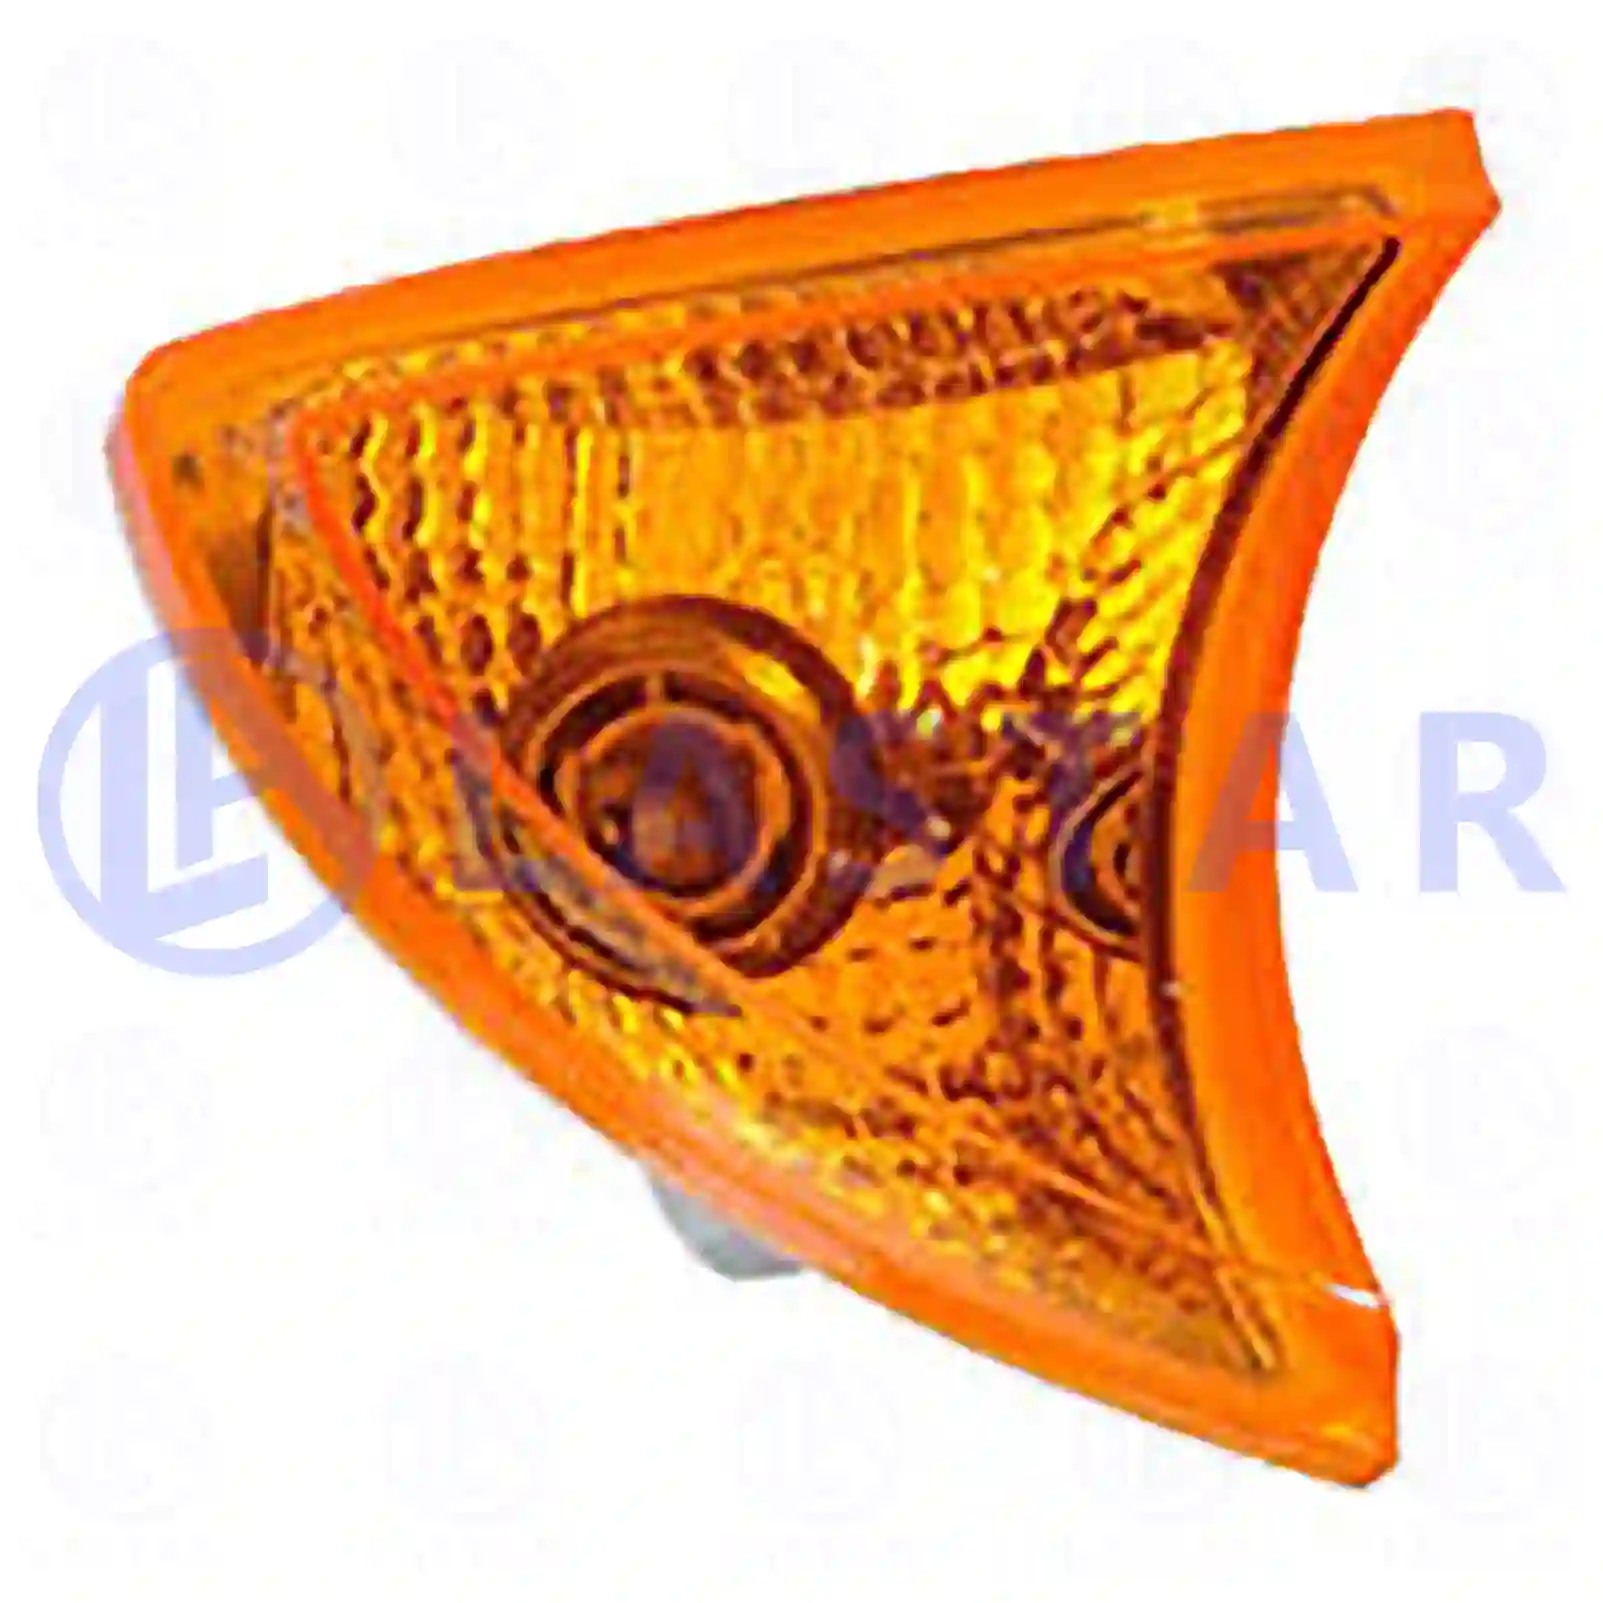 Turn signal lamp, right, without bulb, 77712445, 09855041, 42555041, 504187906, 5801755123, ZG21234-0008 ||  77712445 Lastar Spare Part | Truck Spare Parts, Auotomotive Spare Parts Turn signal lamp, right, without bulb, 77712445, 09855041, 42555041, 504187906, 5801755123, ZG21234-0008 ||  77712445 Lastar Spare Part | Truck Spare Parts, Auotomotive Spare Parts